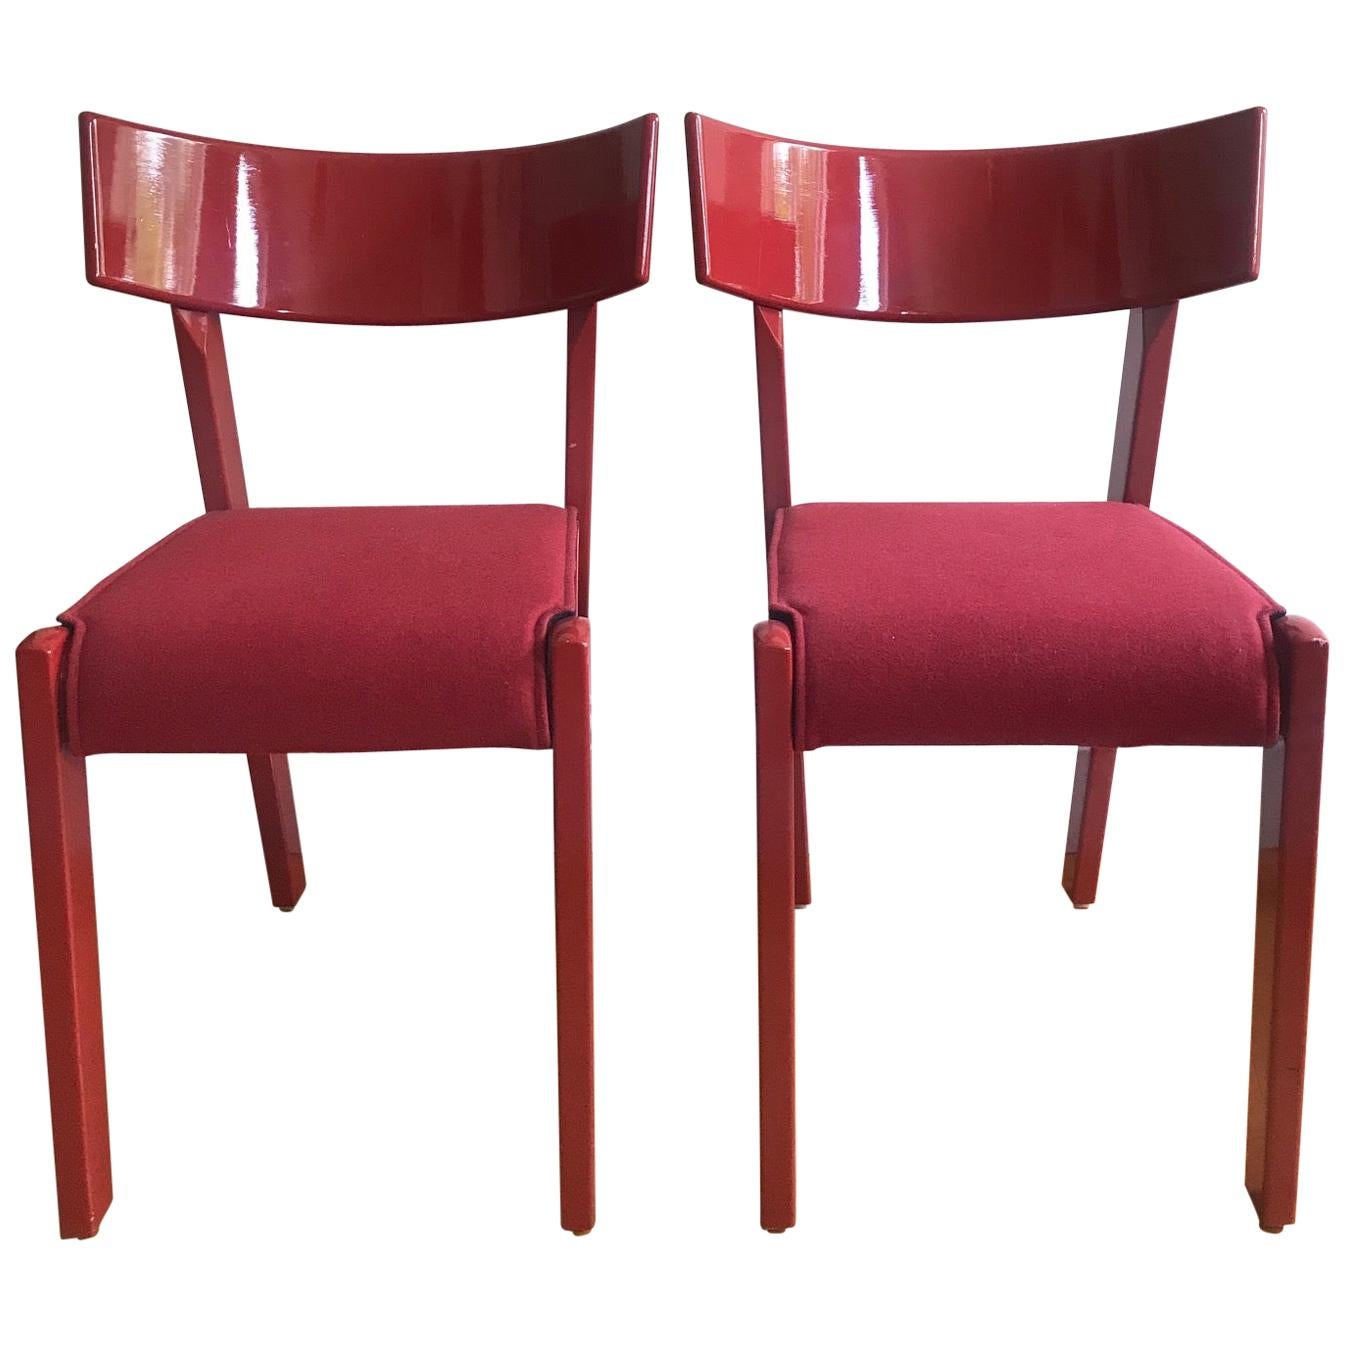 Pair of Red Chairs by Ralf Lindberg for Garsnas